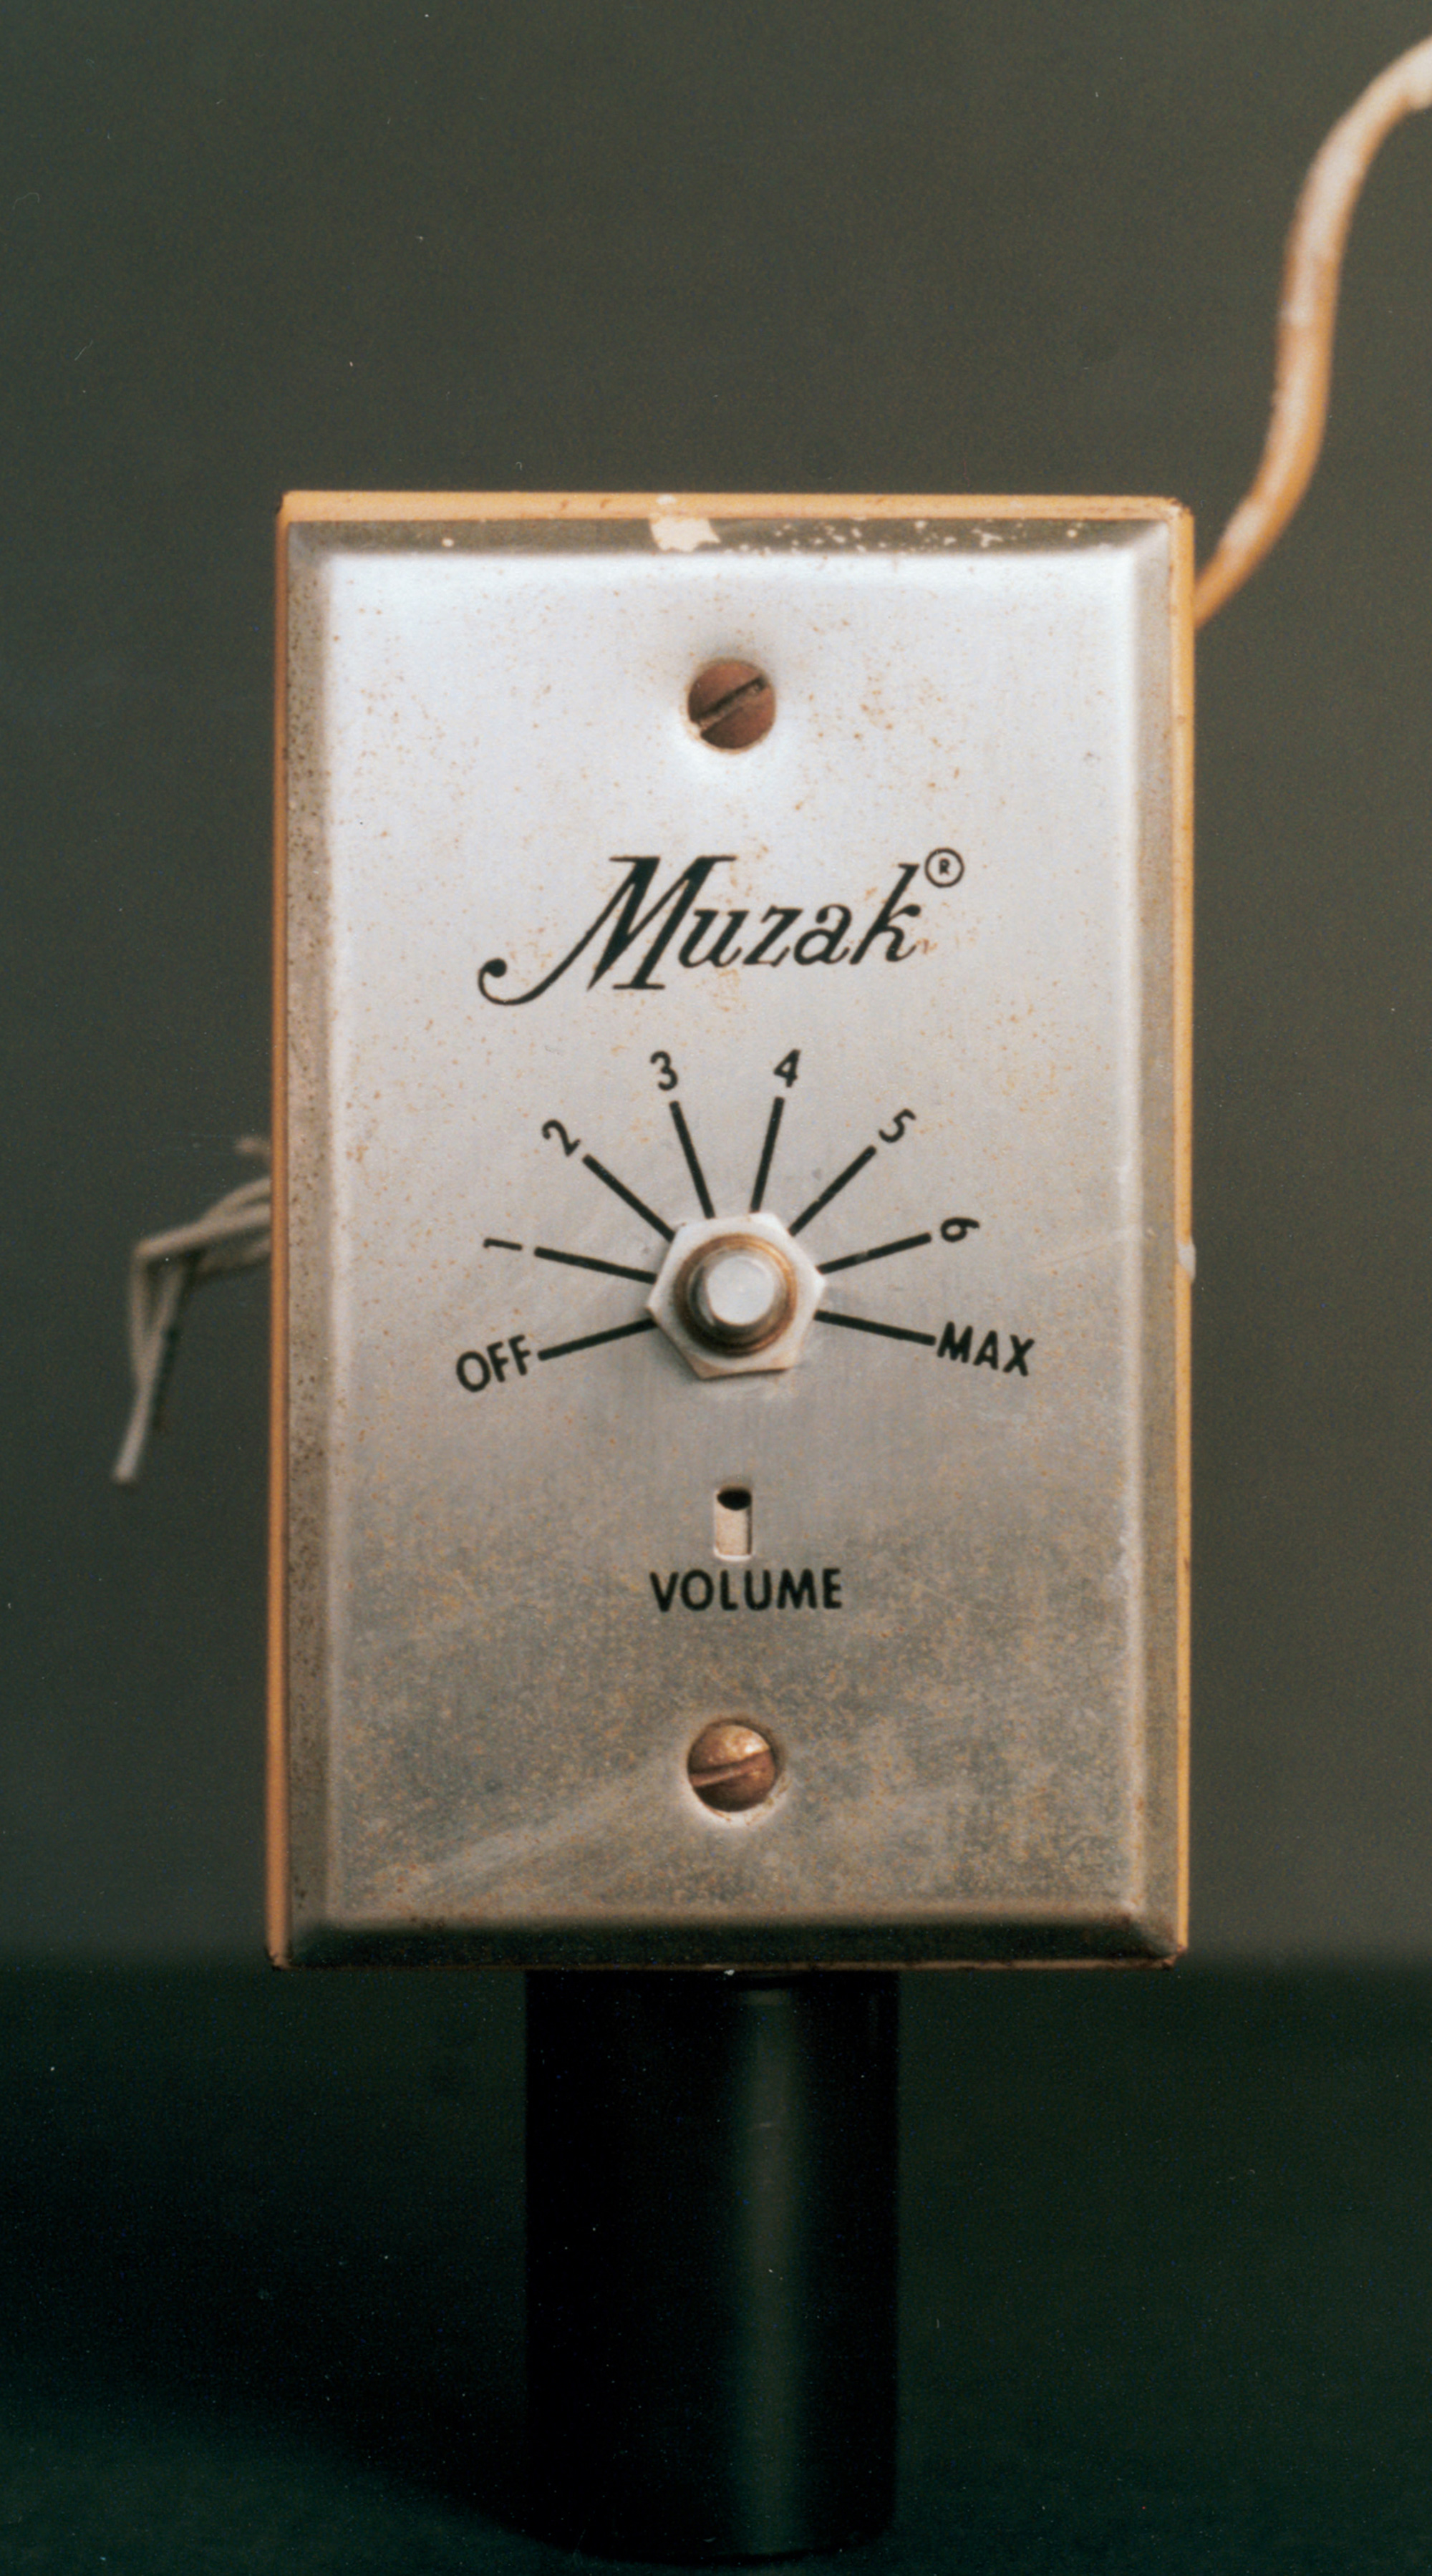 A photograph of a Muzak box from the 1950s.